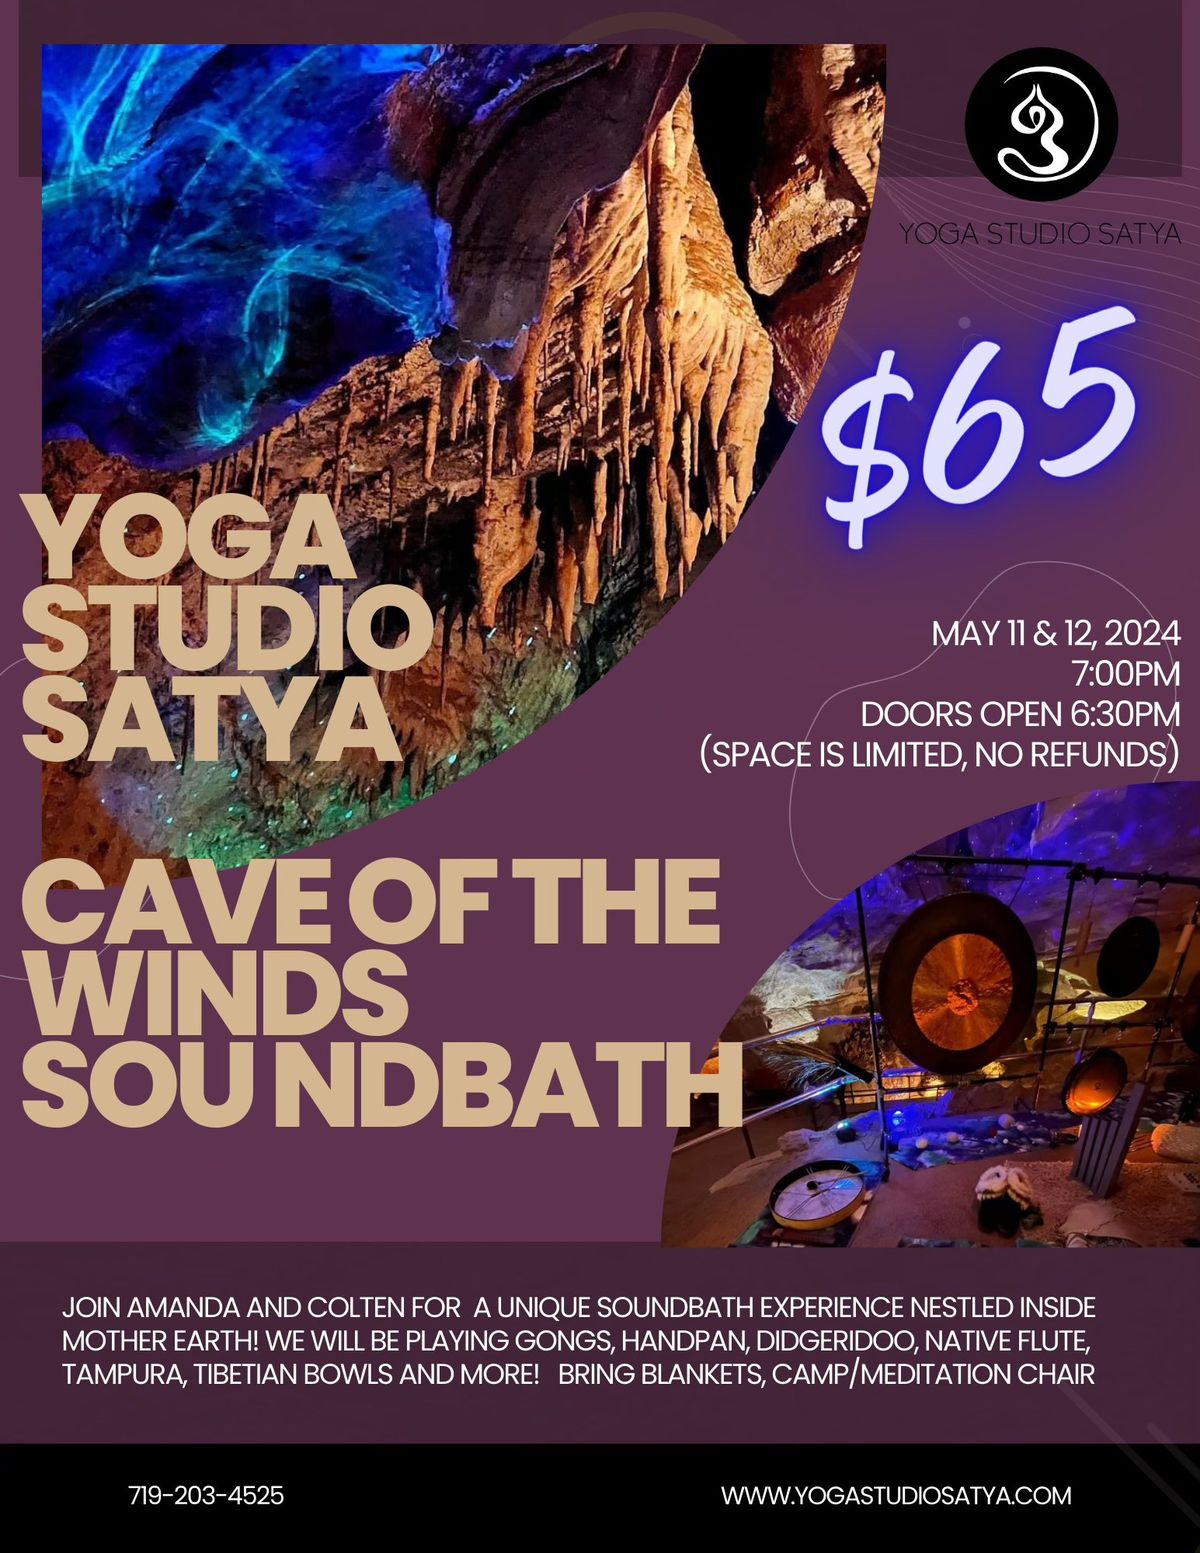 Soundbath at the CAVE OF THE WINDS